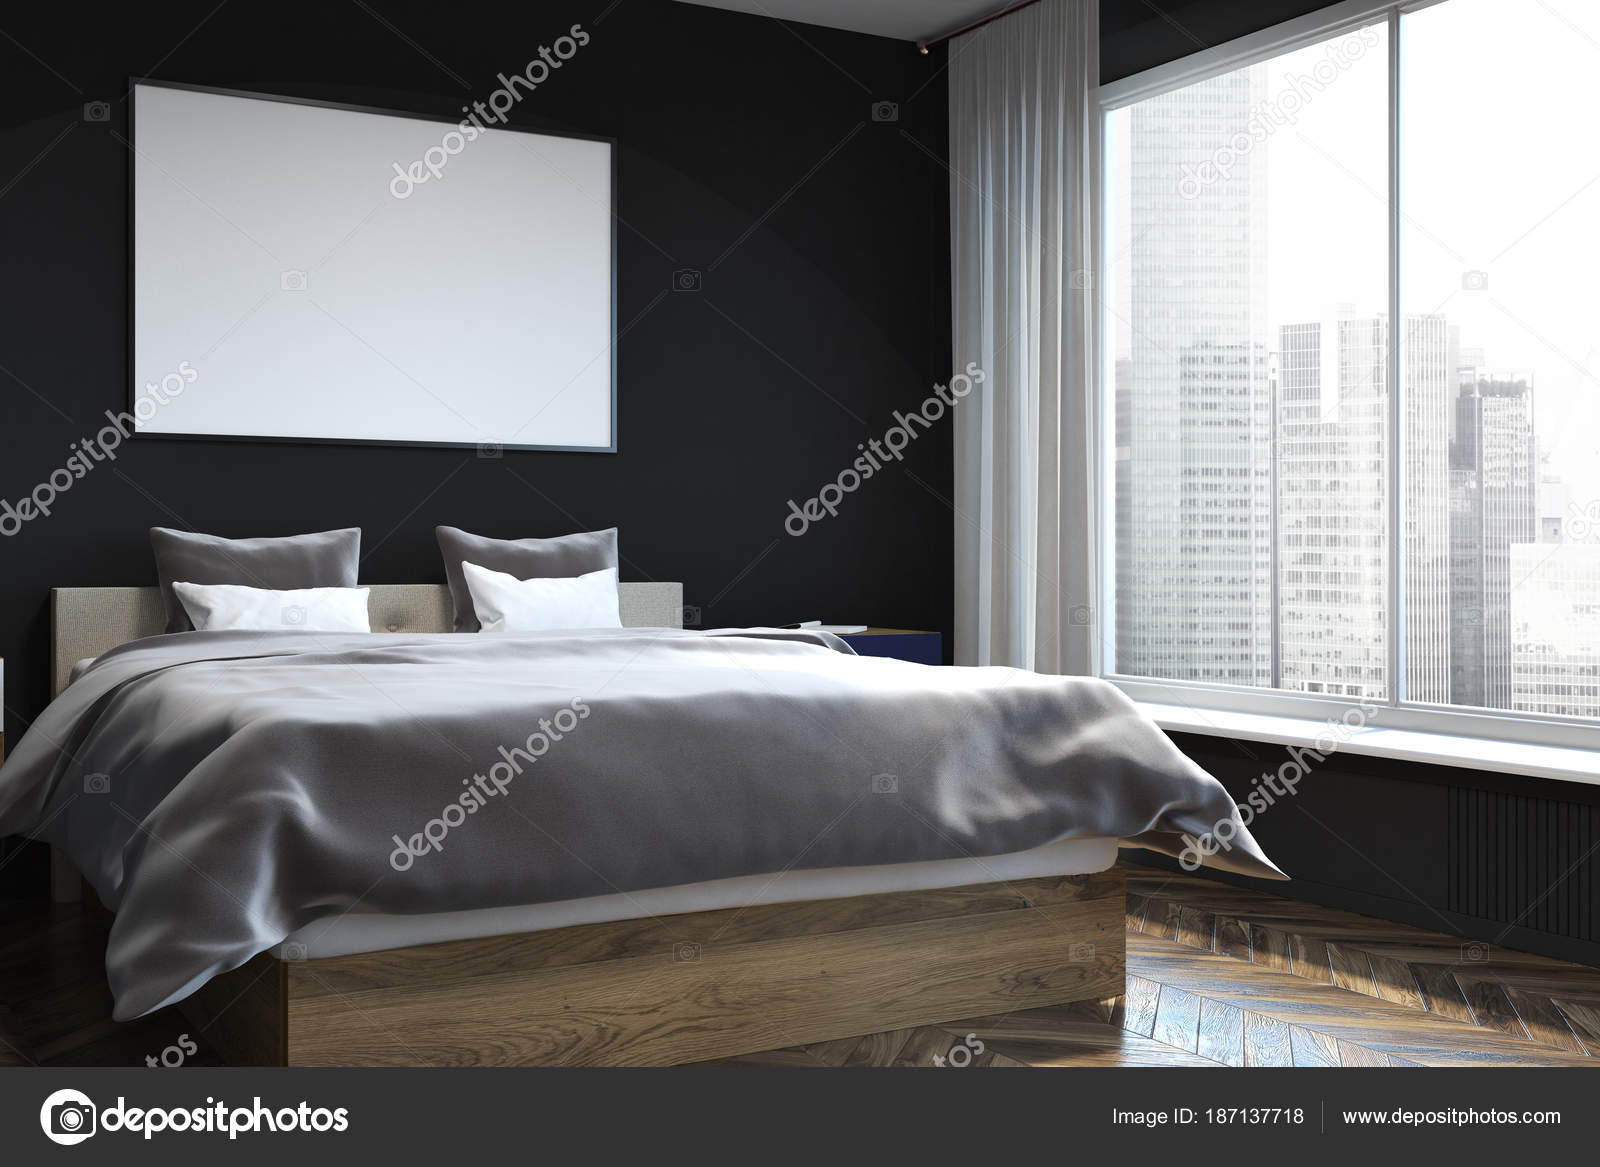 Black Wall Bedroom Interior Poster Side View Stock Photo